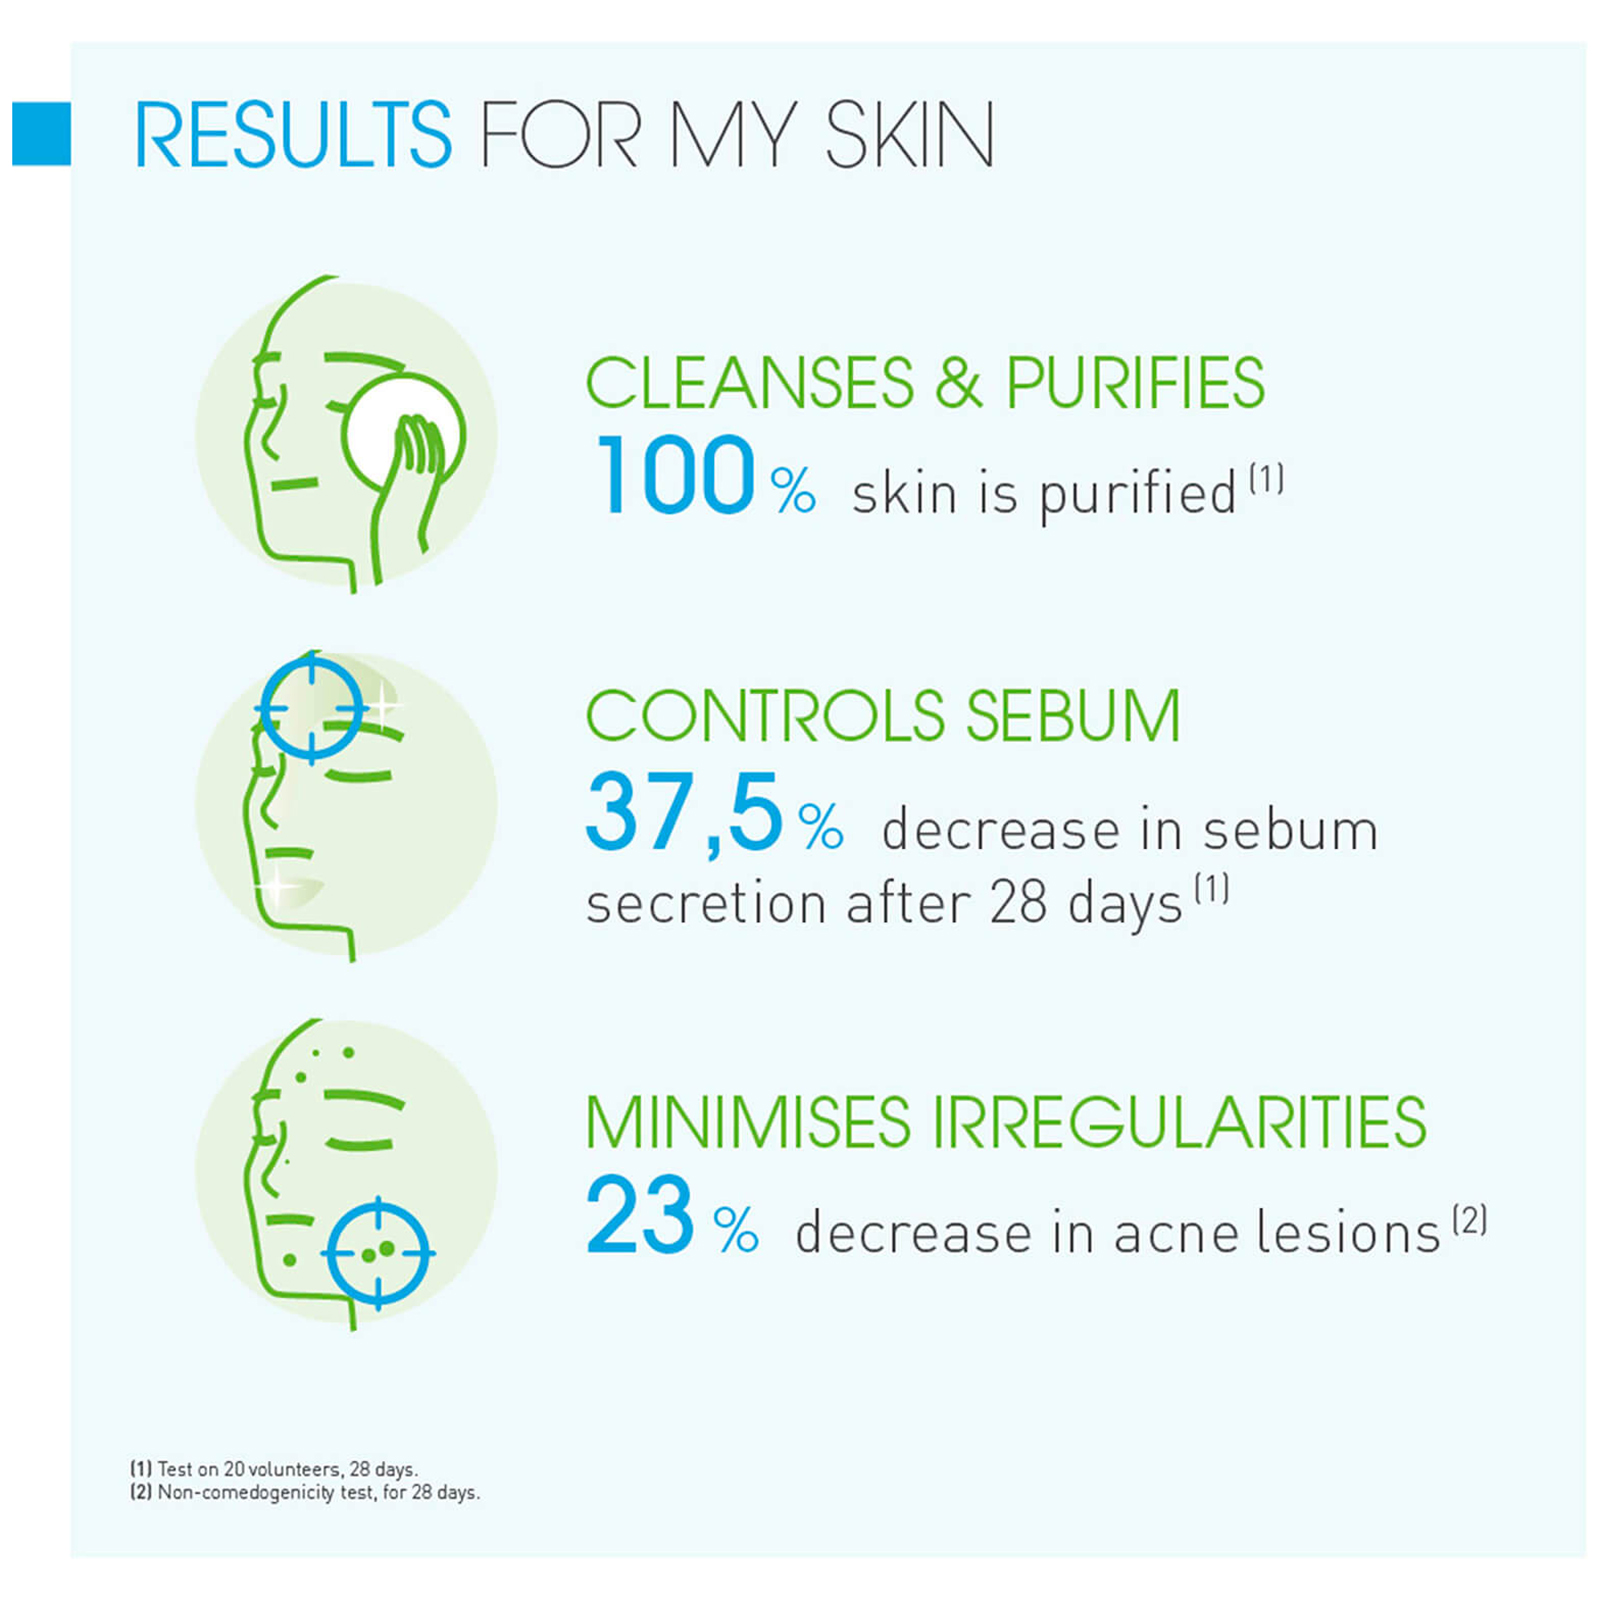 Results for your skin.